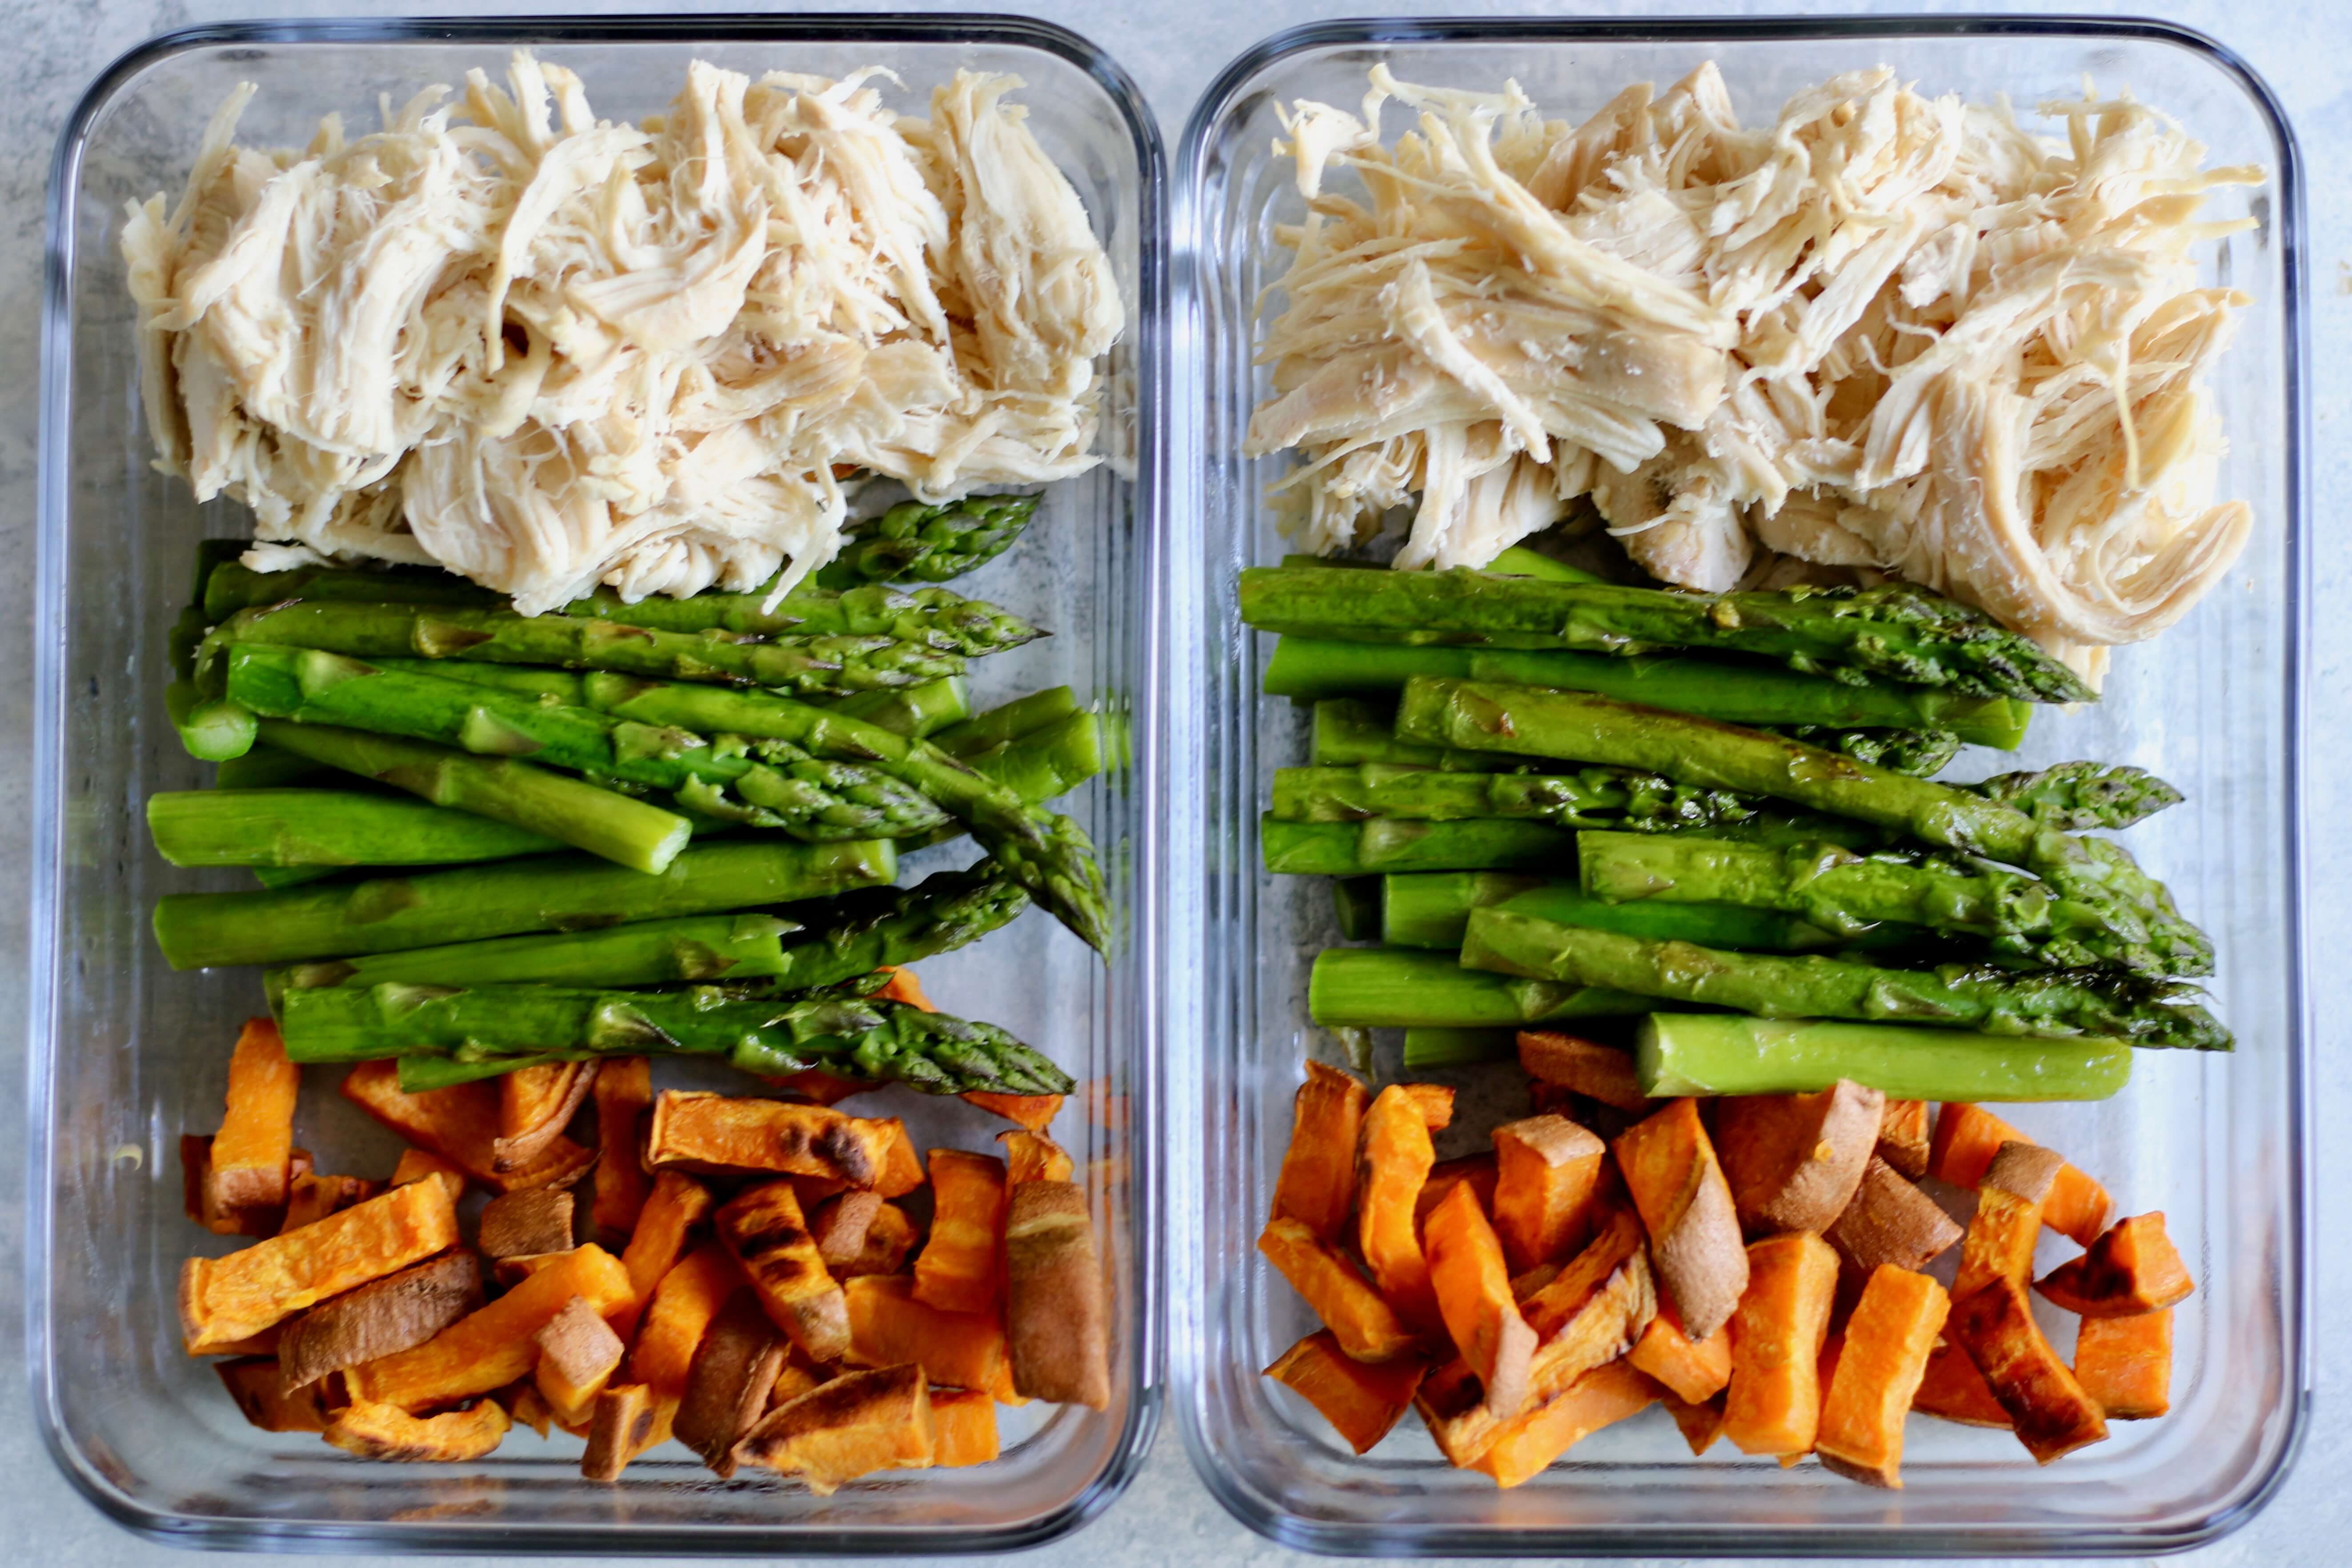 20 Simple Meals to Help Your Clients Hit Their Macros: Chicken, Asparagus & Sweet Potato